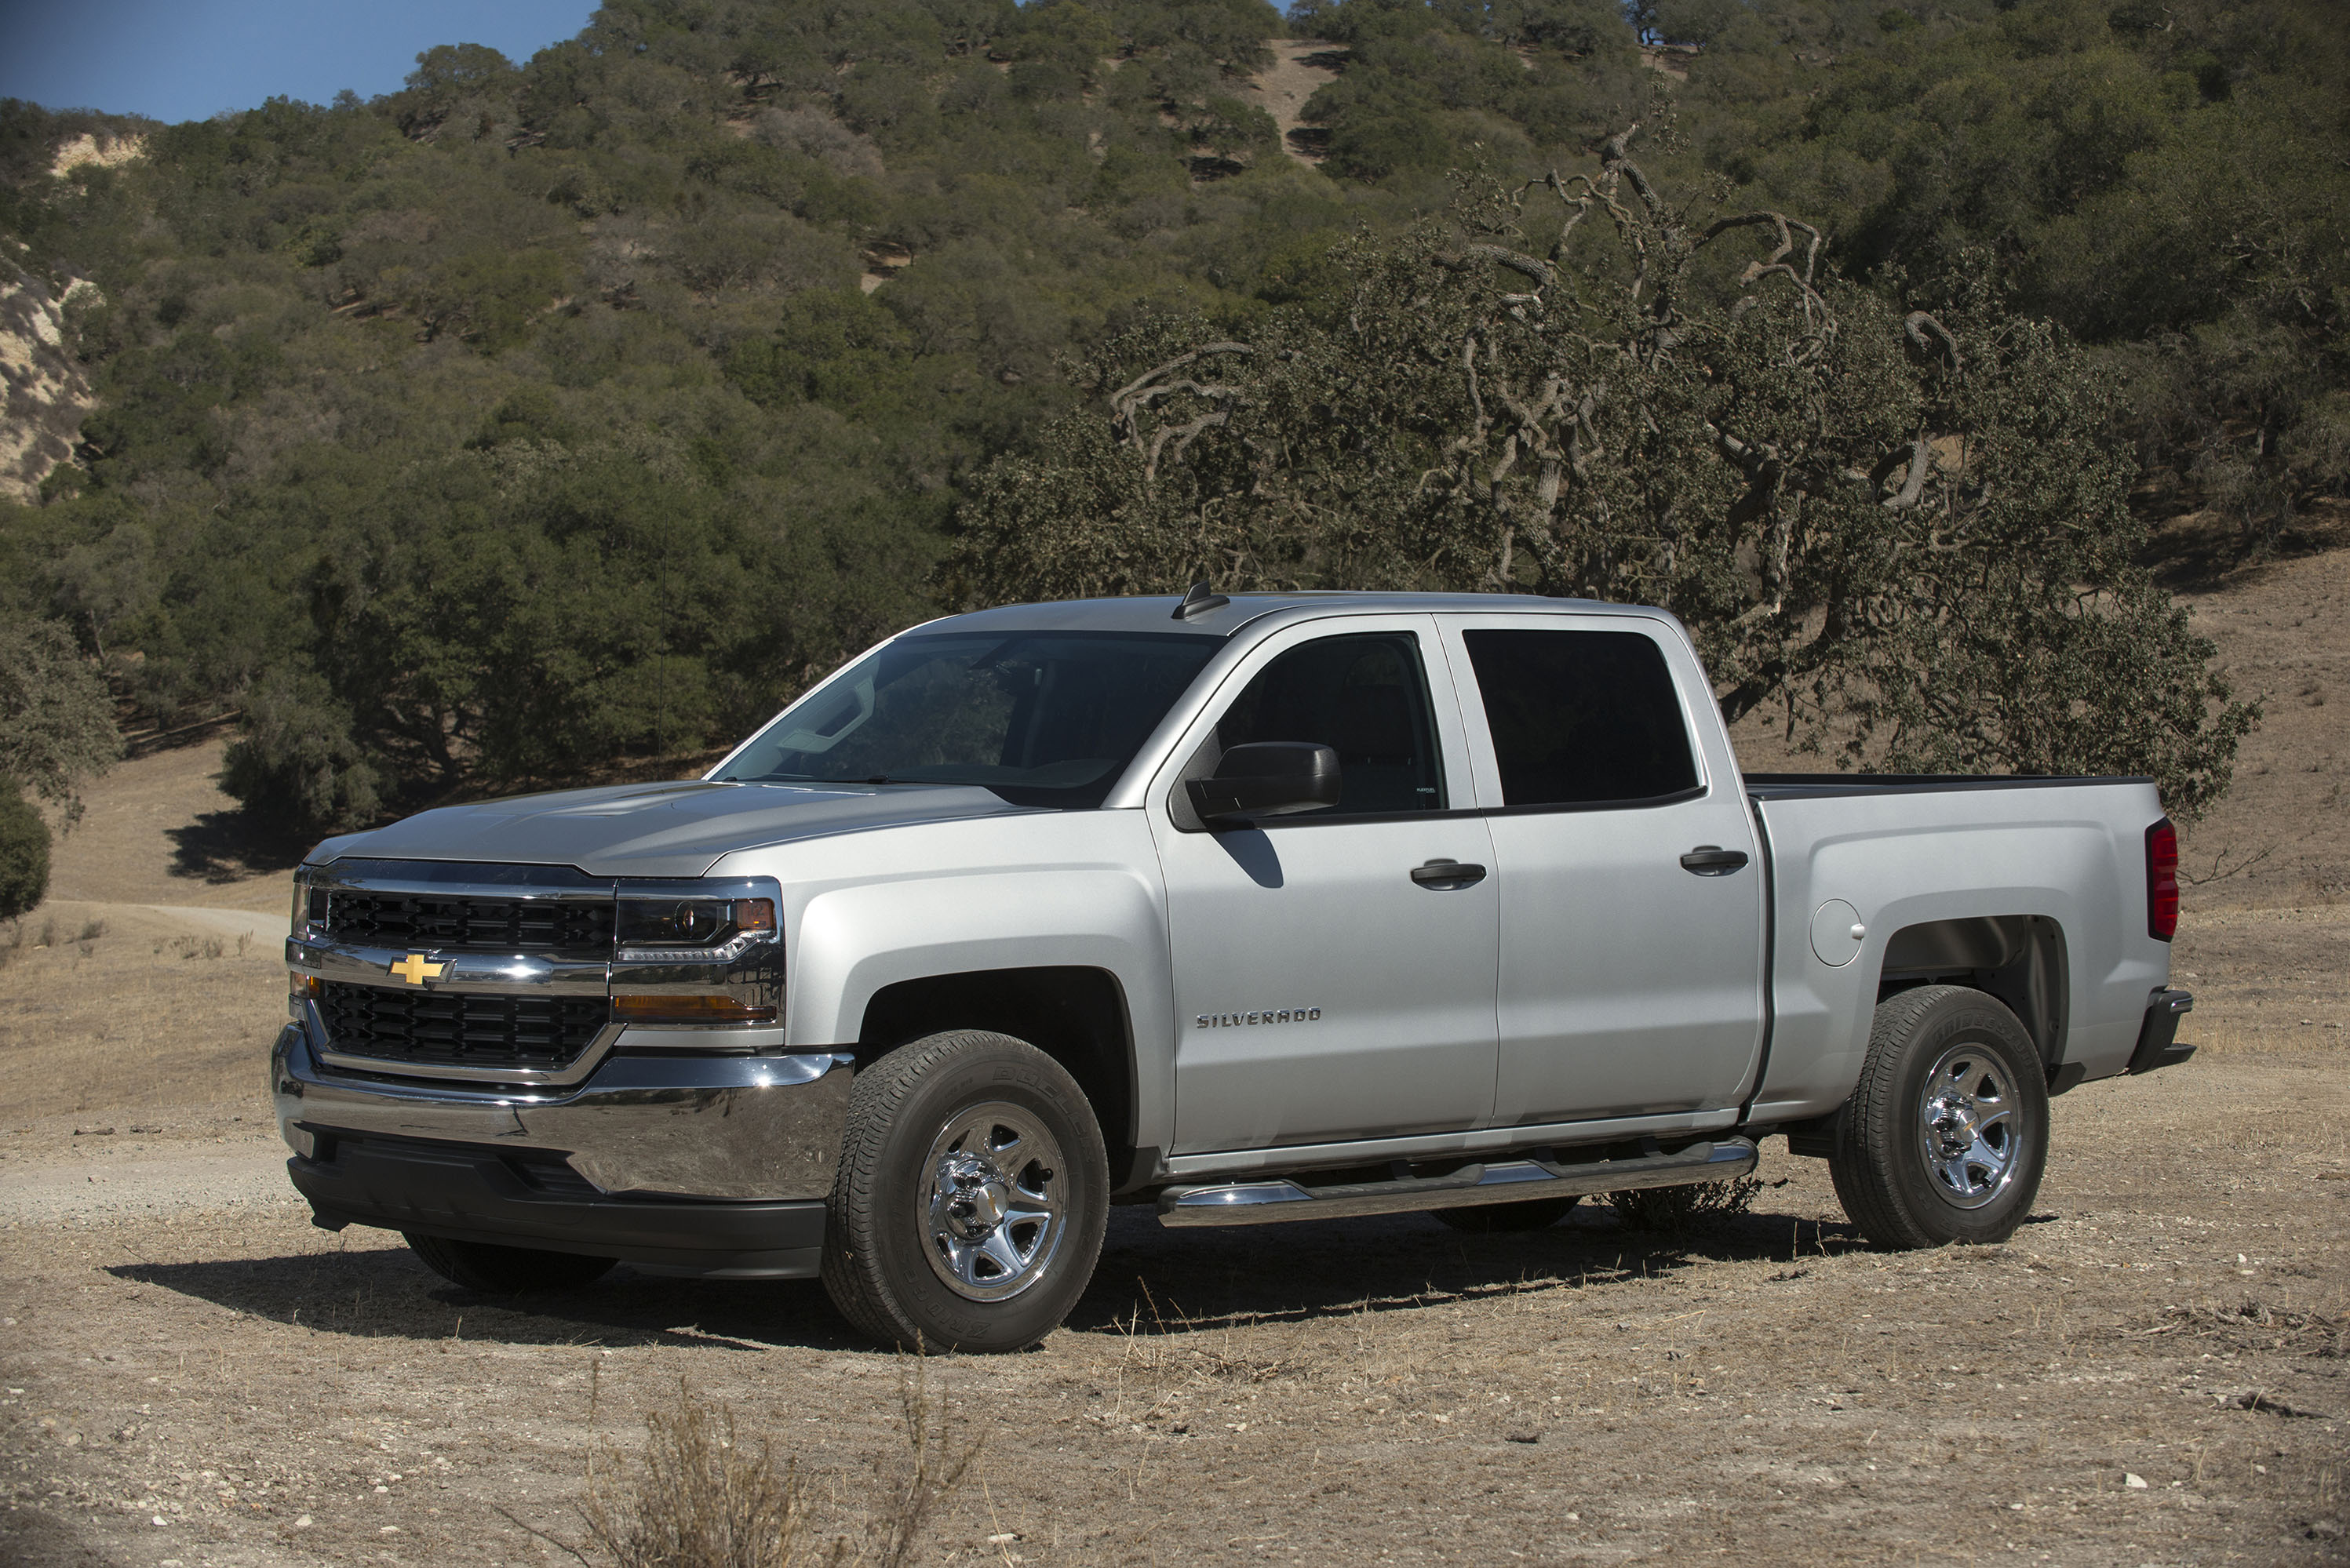 2018 Chevrolet Silverado 1500 (Chevy) Review, Ratings, Specs, Prices, and  Photos - The Car Connection